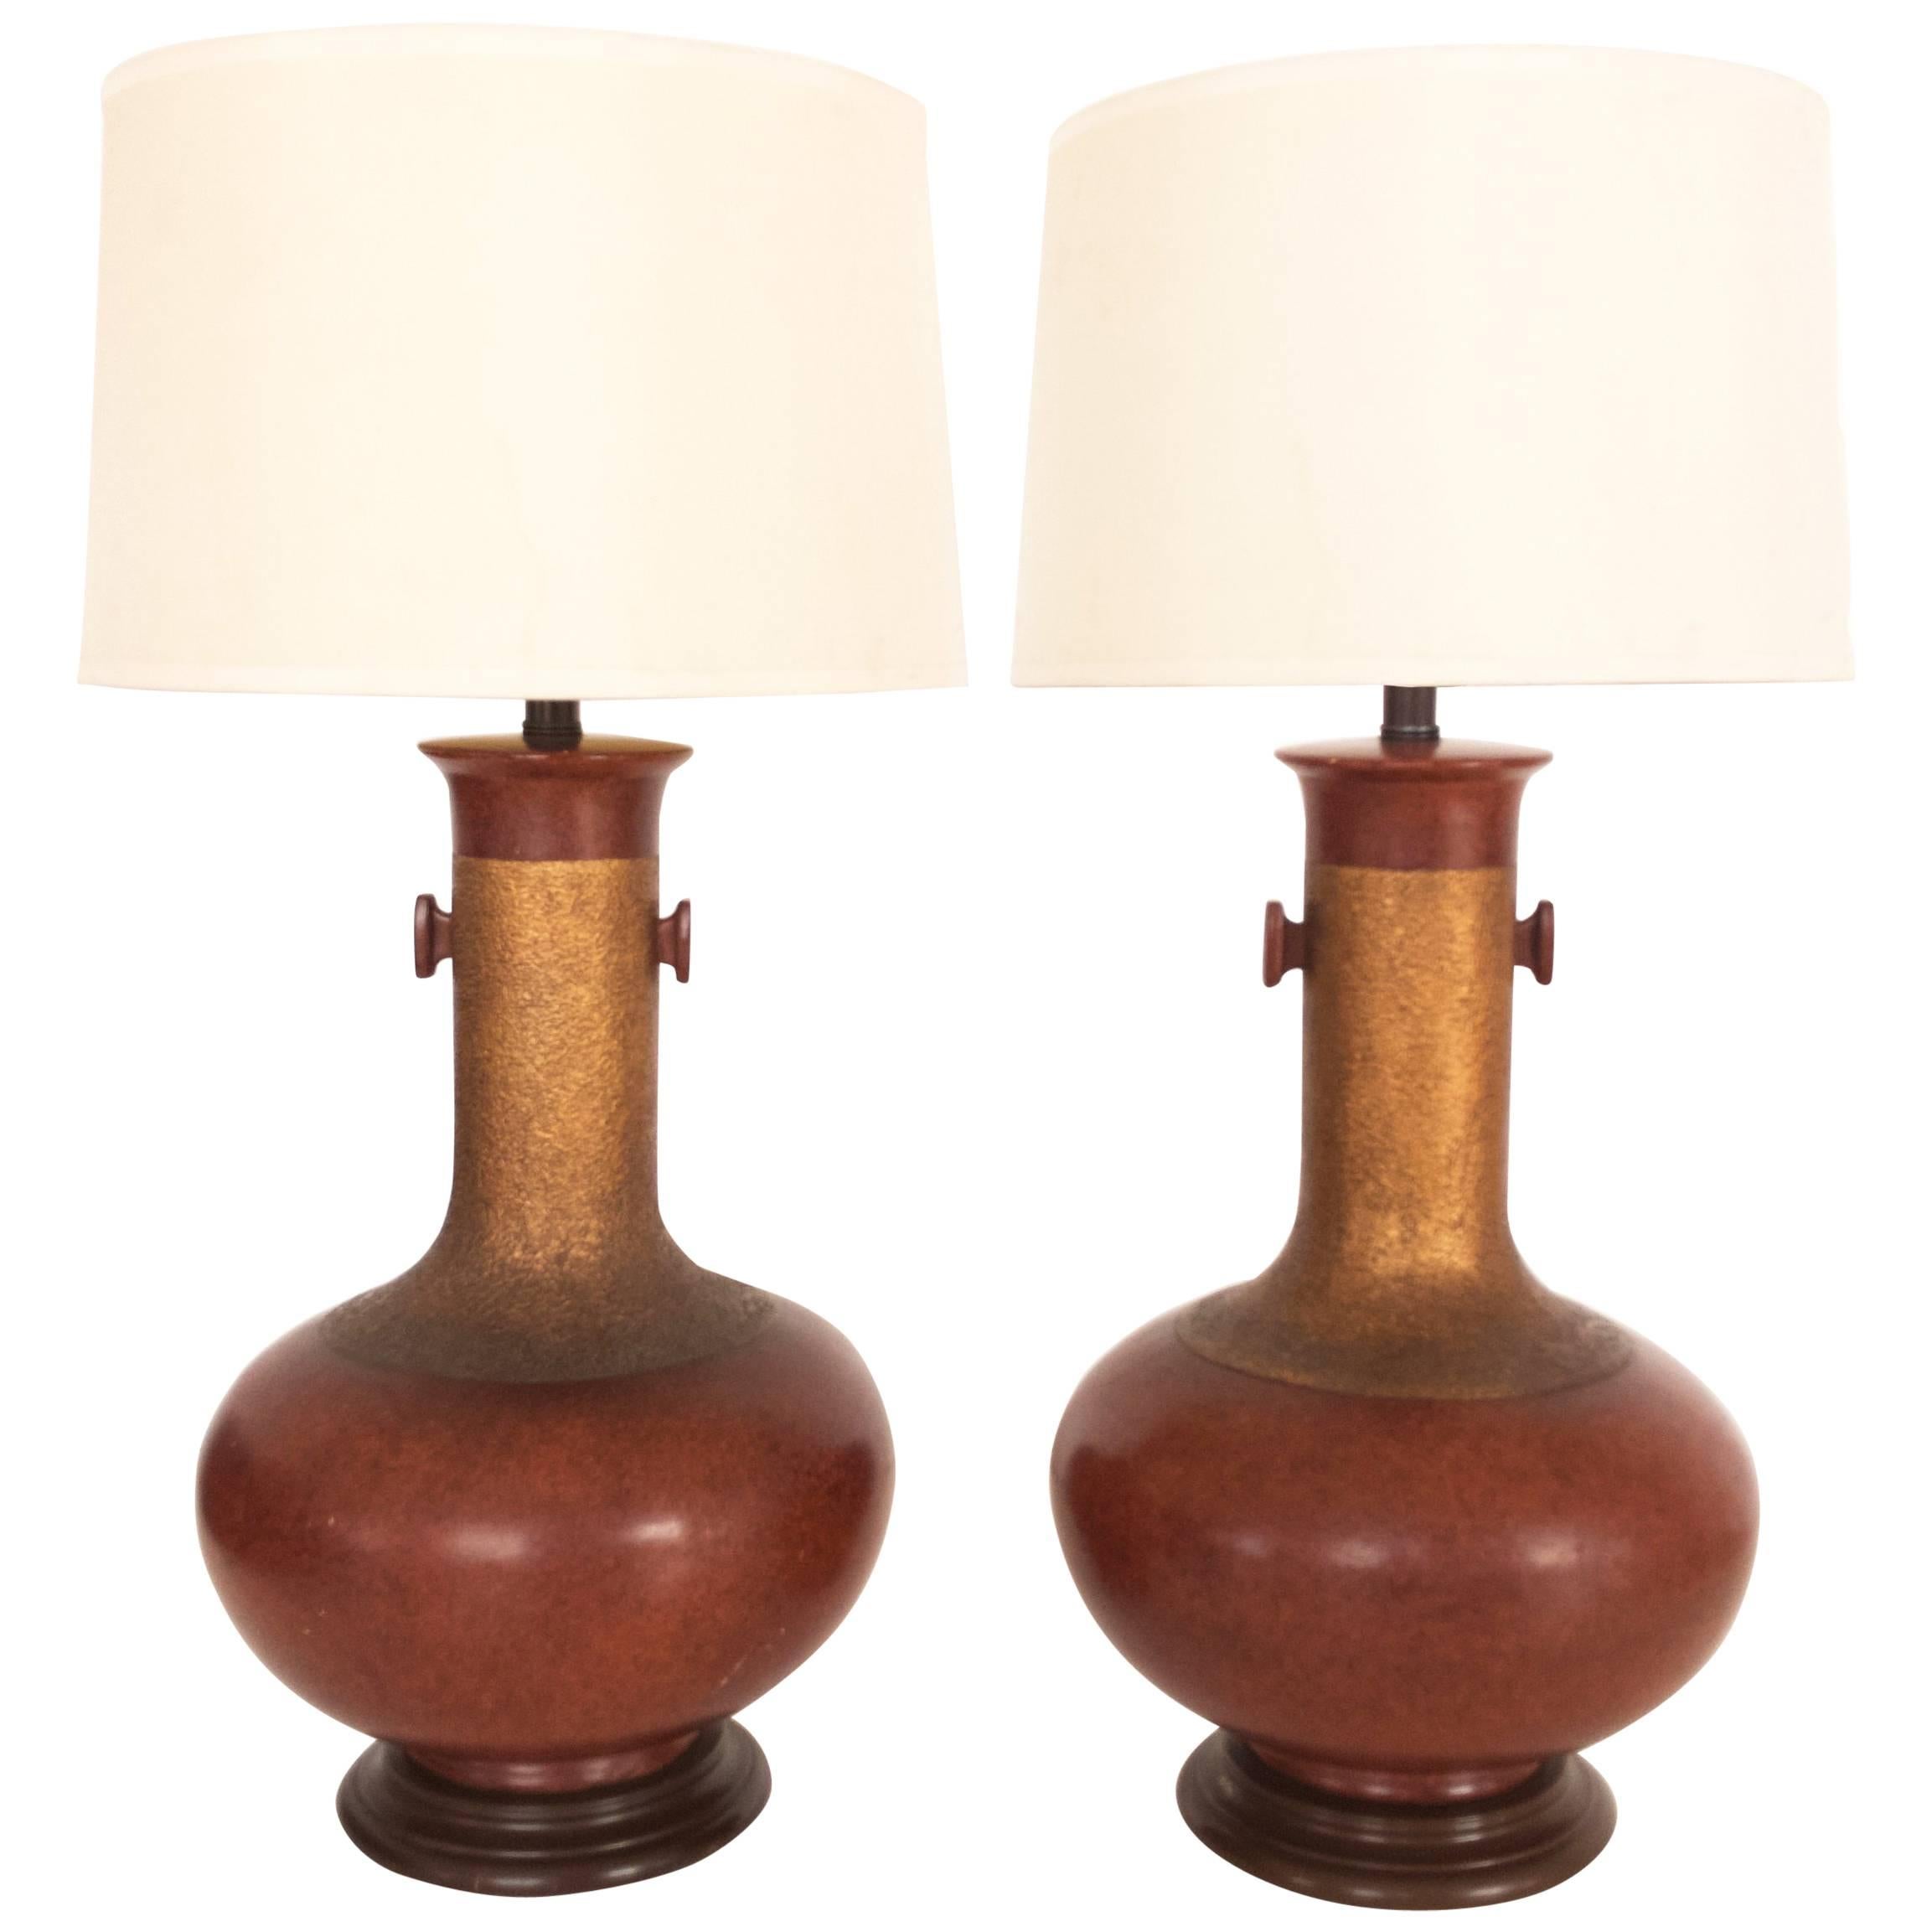 Pair of Oversized Ceramic Asian Style Urn-Shaped Table Lamps, 1960s For Sale